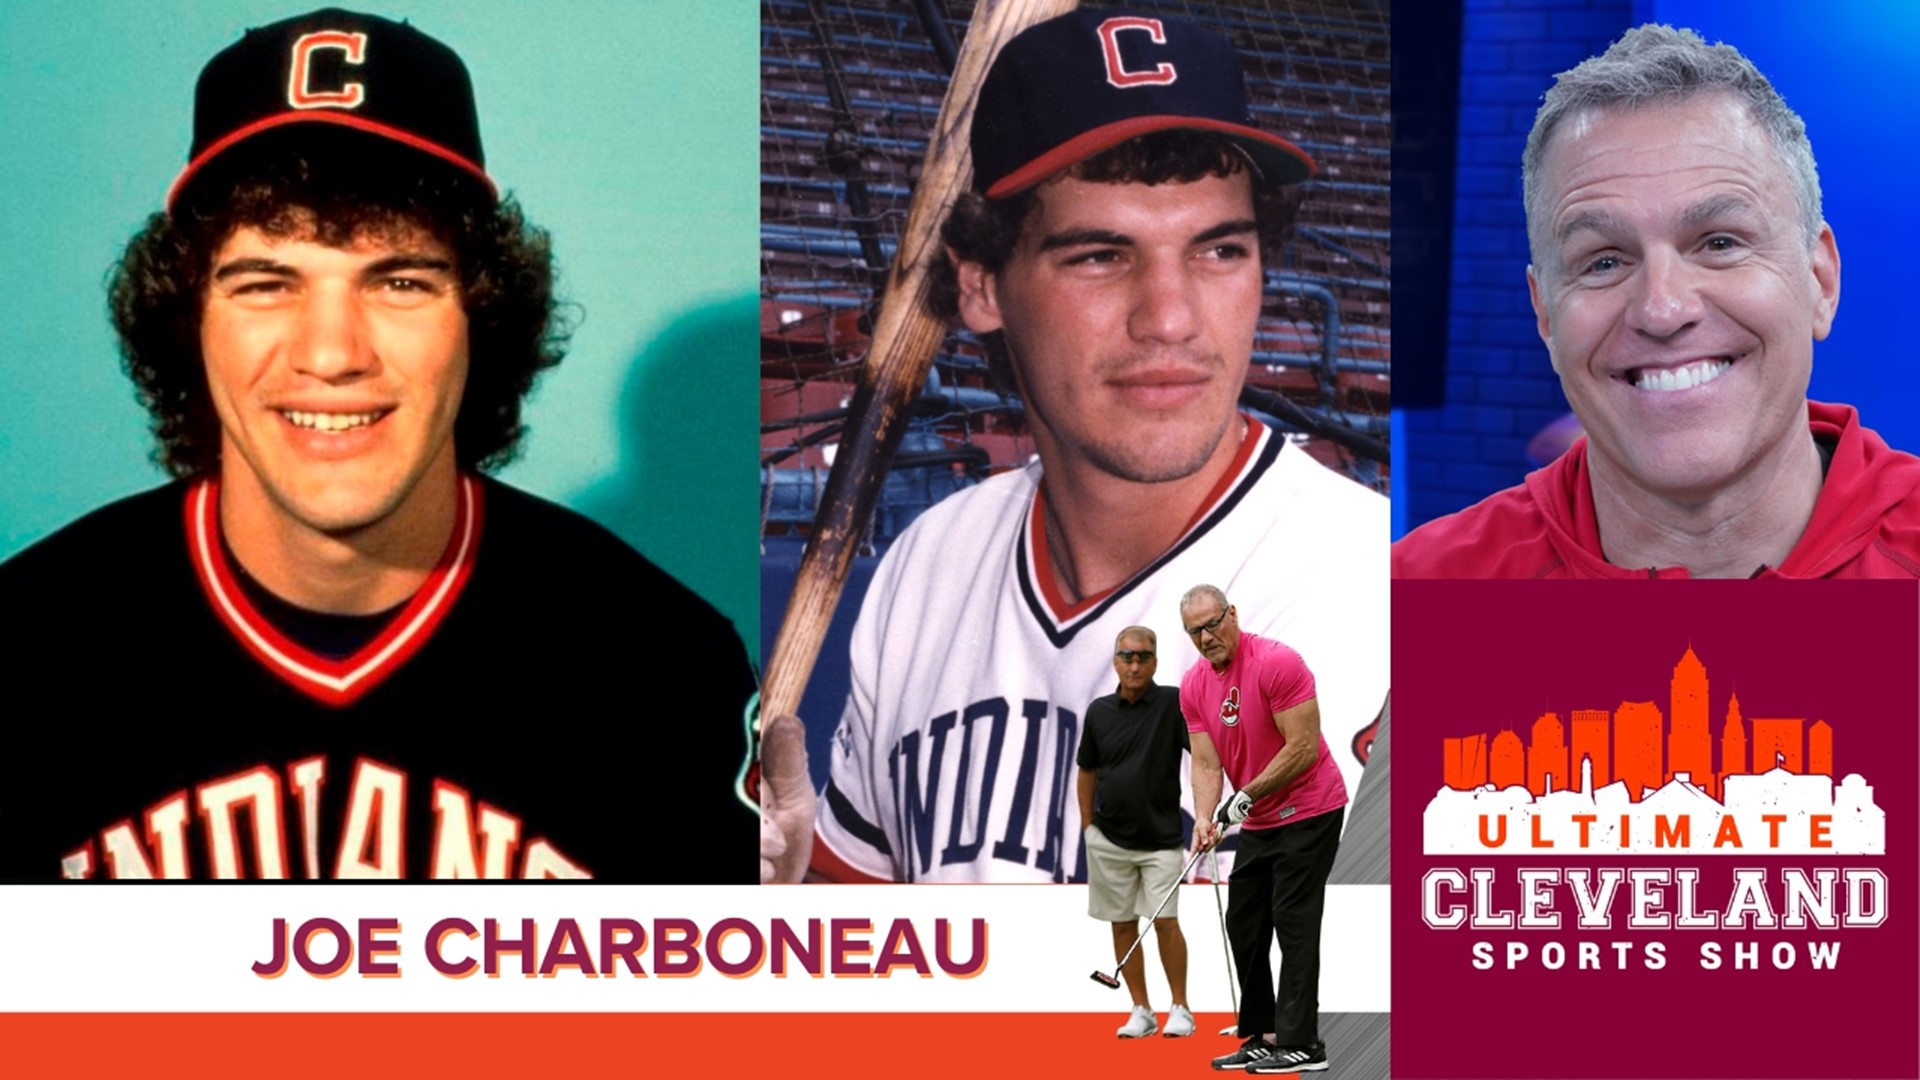 Cleveland Indians legend Joe Charboneau makes his debut on UCSS sharing his best MLB memories and the afterlife.